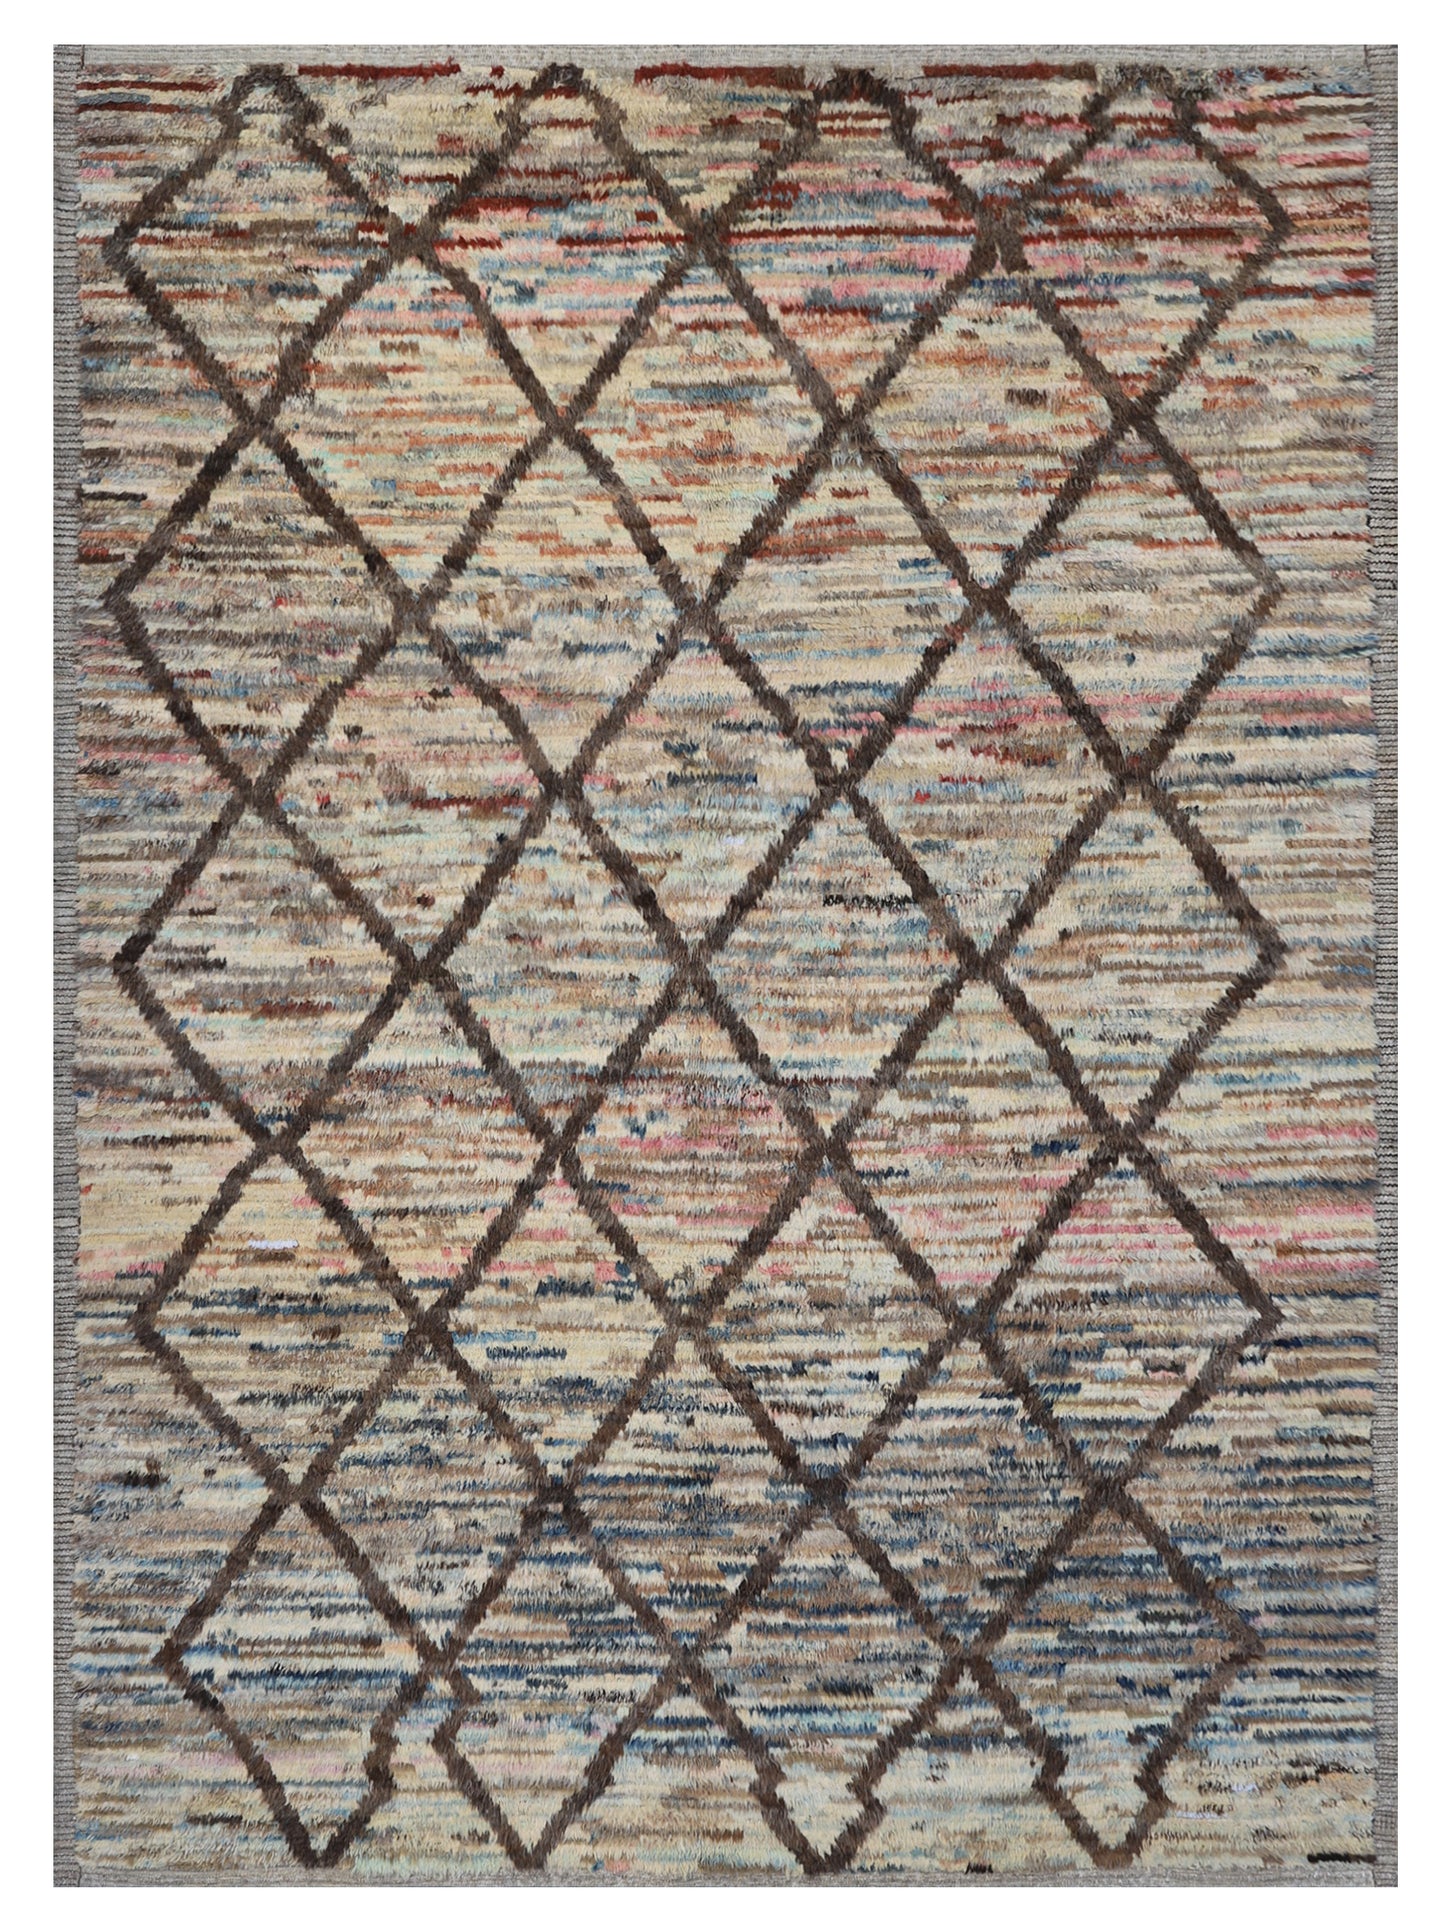 8'x10' Colorful Hand-knotted Ariana Barchi Rug